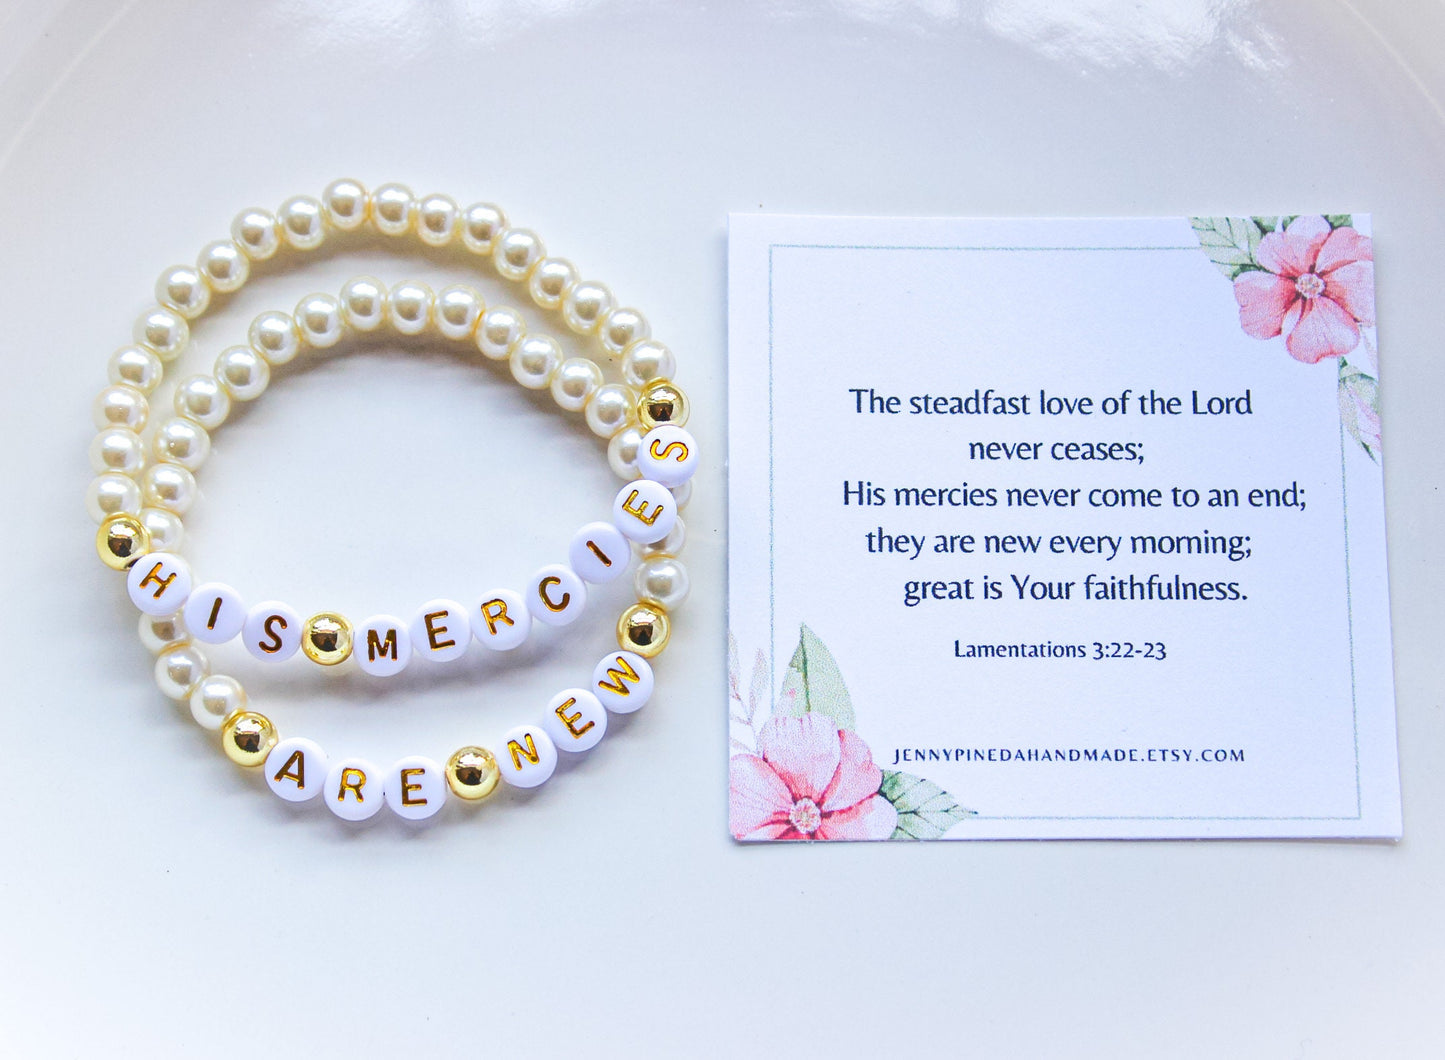 His mercies are new bracelet, reformed gift, faith bracelet, christian jewelry, his mercies are new every morning, christian birthday gift